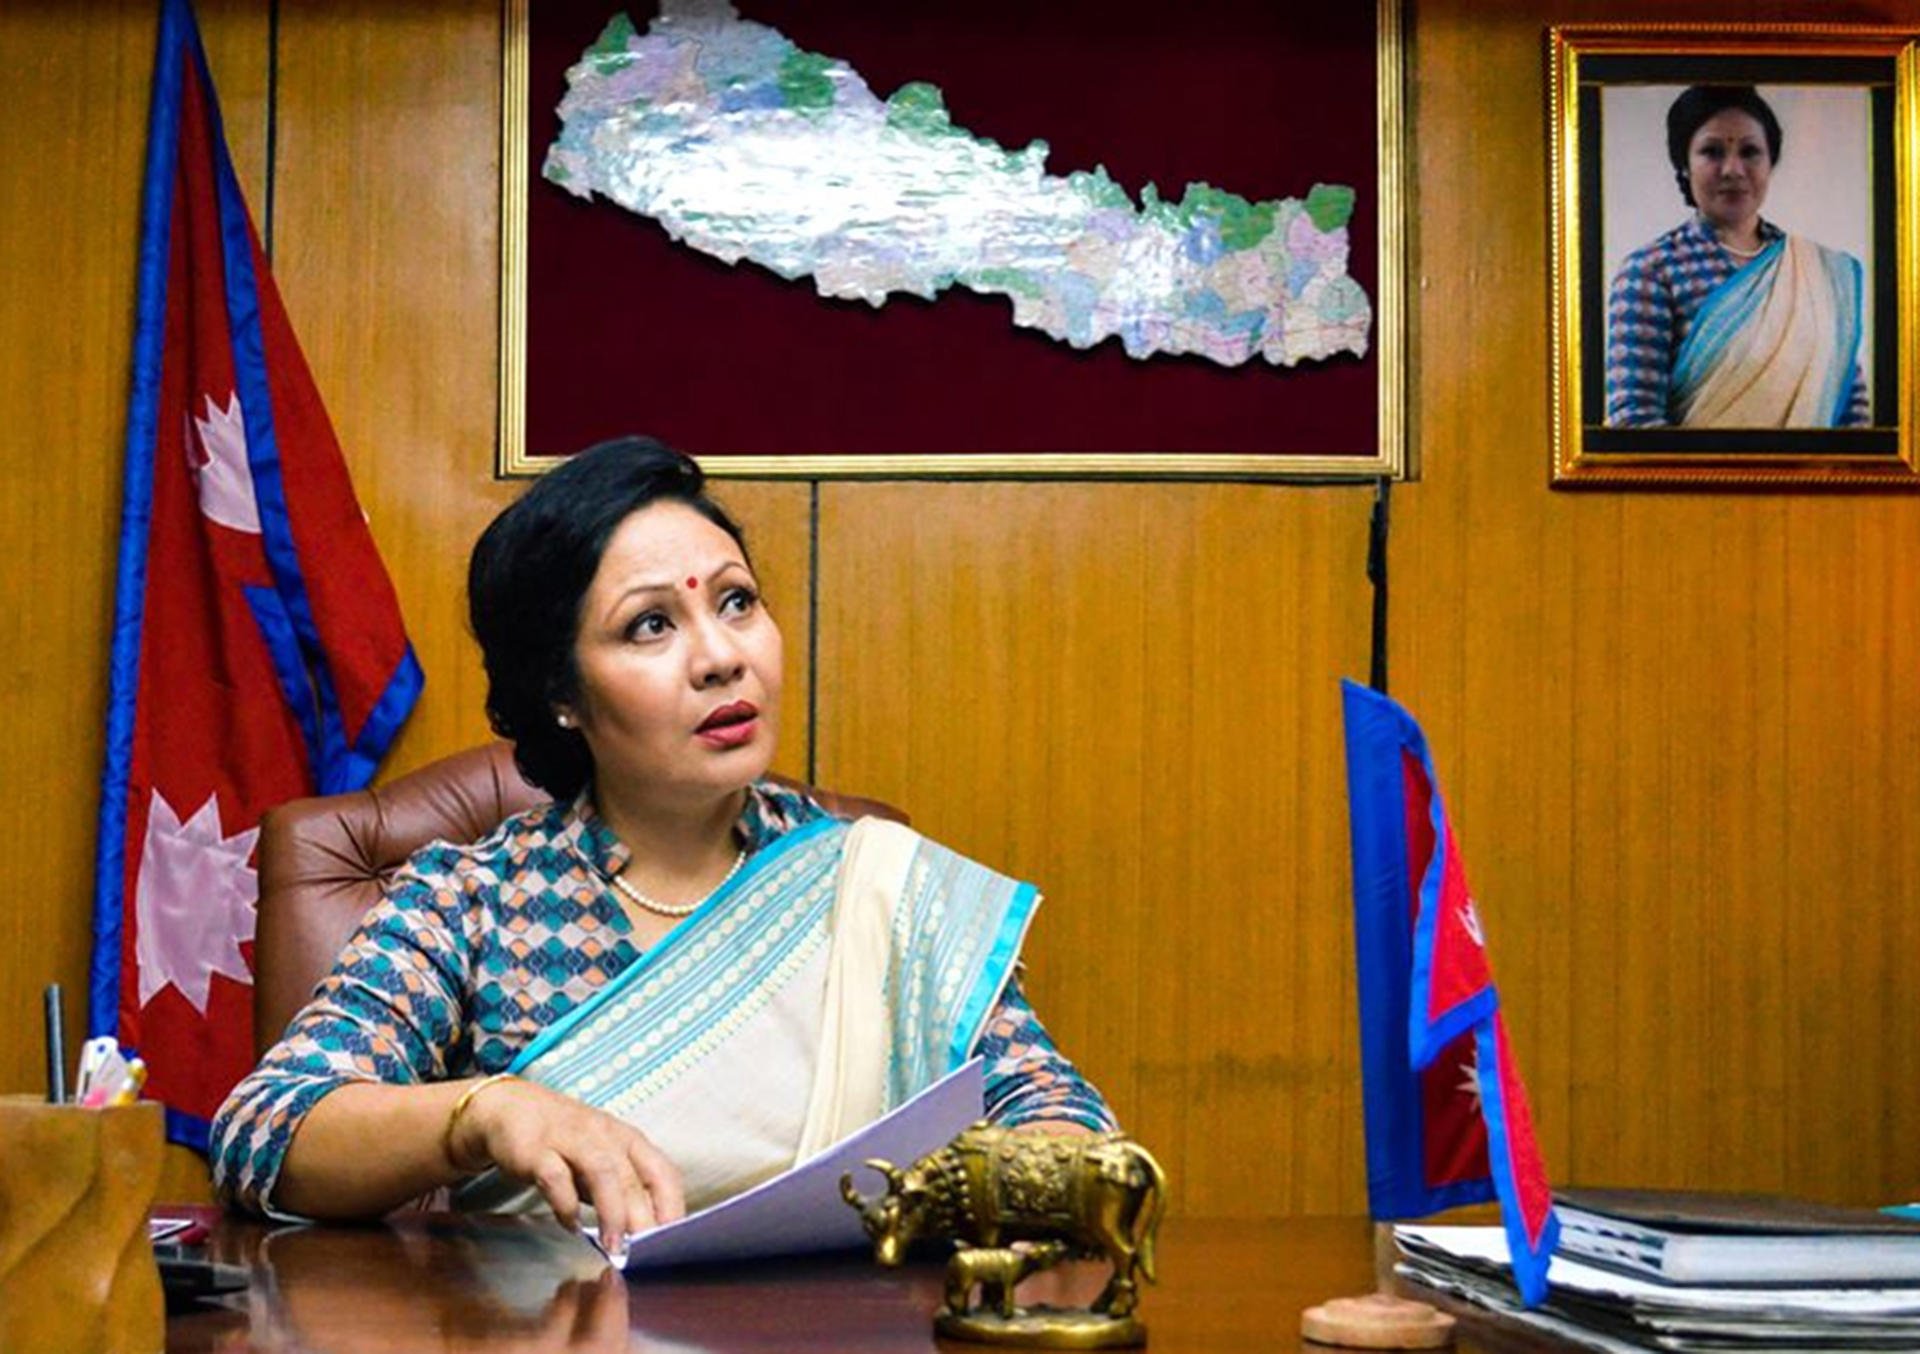 Nepali actress Gauri Malla plays Nepal's first woman prime minister in the television seriesSingha Durbar. Photo: Nimesh Puri/Search For Common Ground Nepal